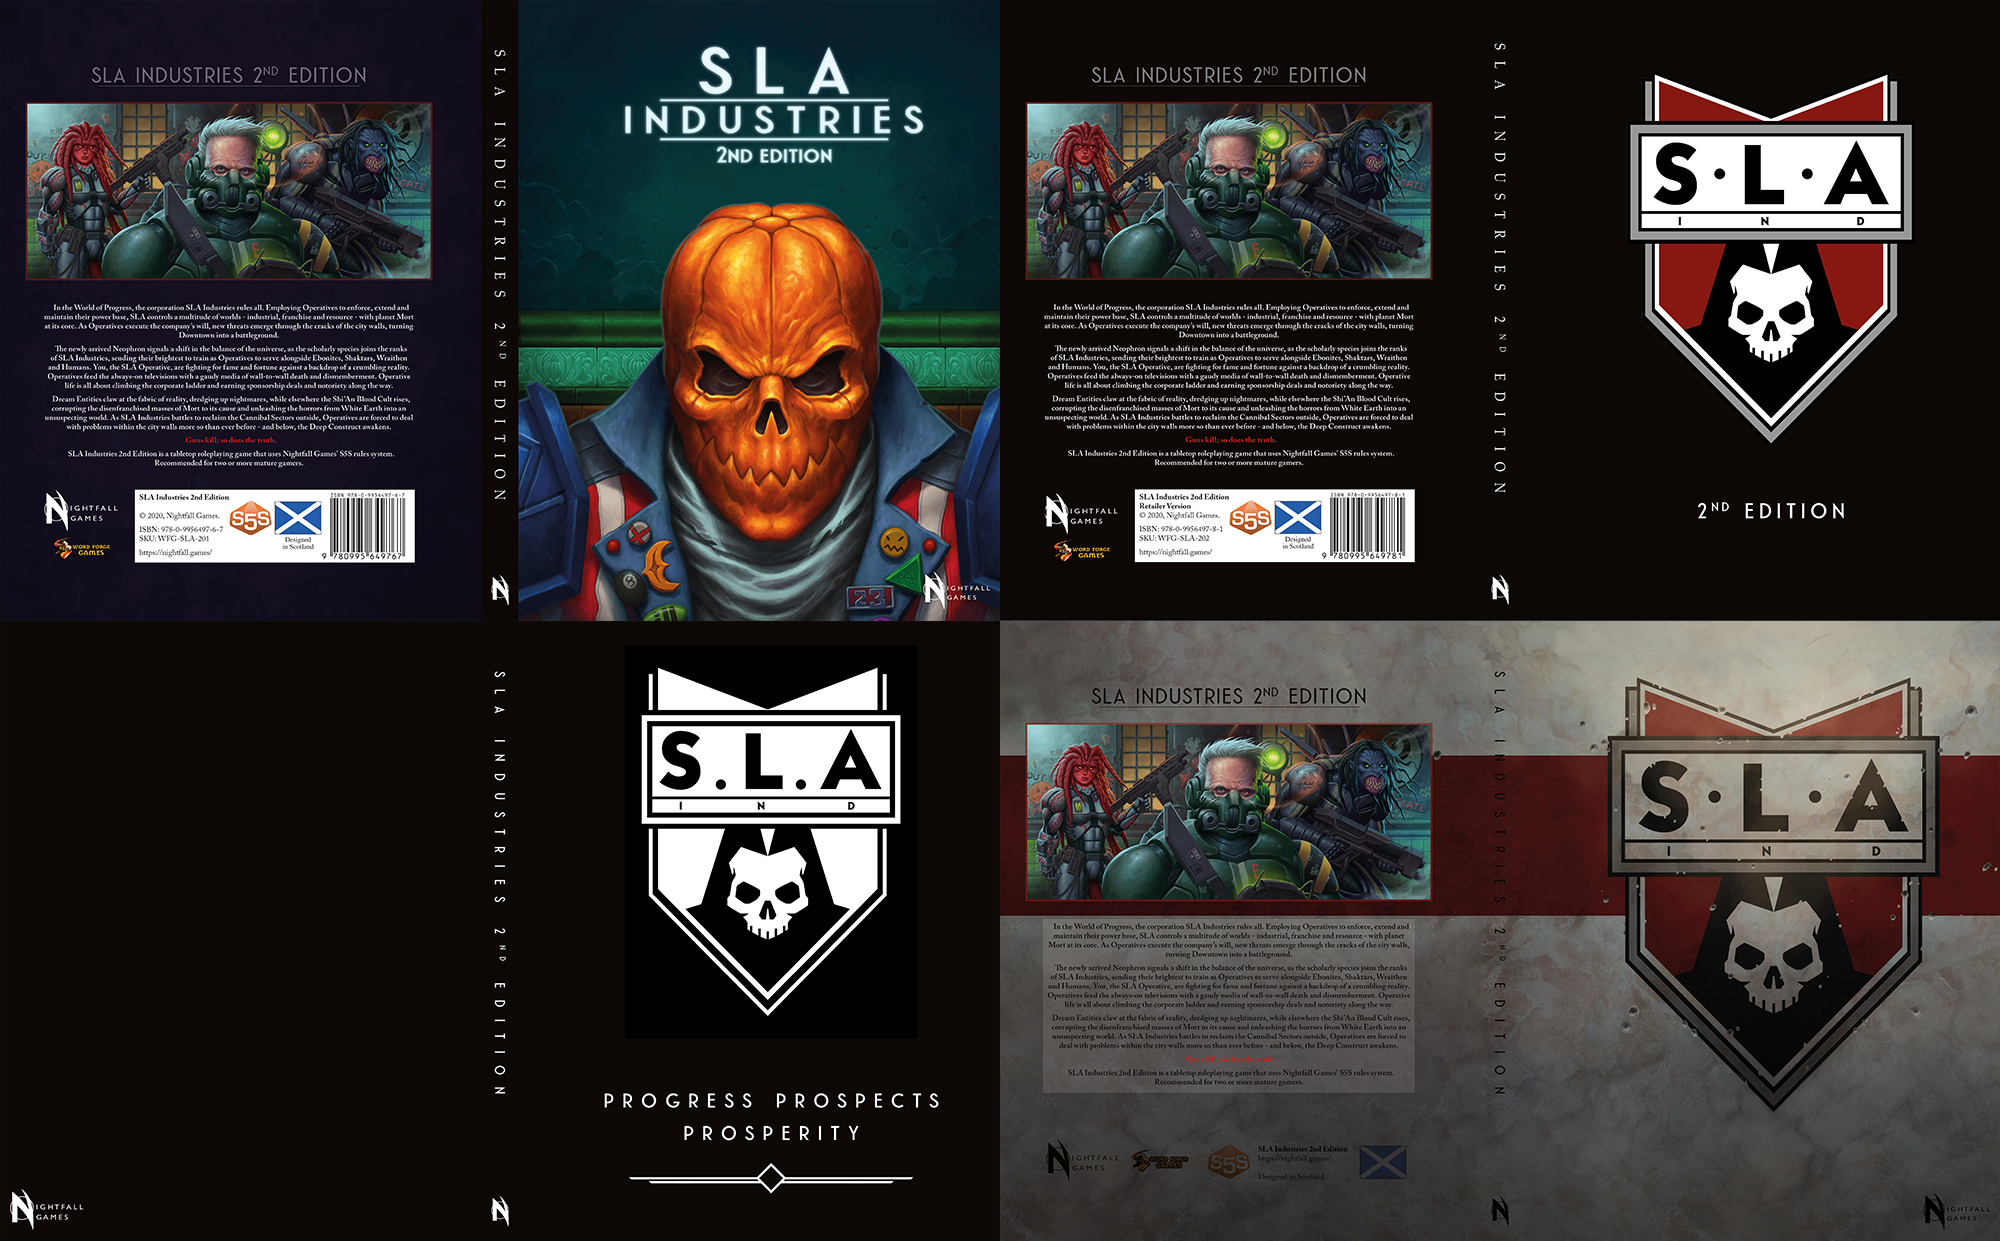 SLA Industries 2nd Edition is at the printers